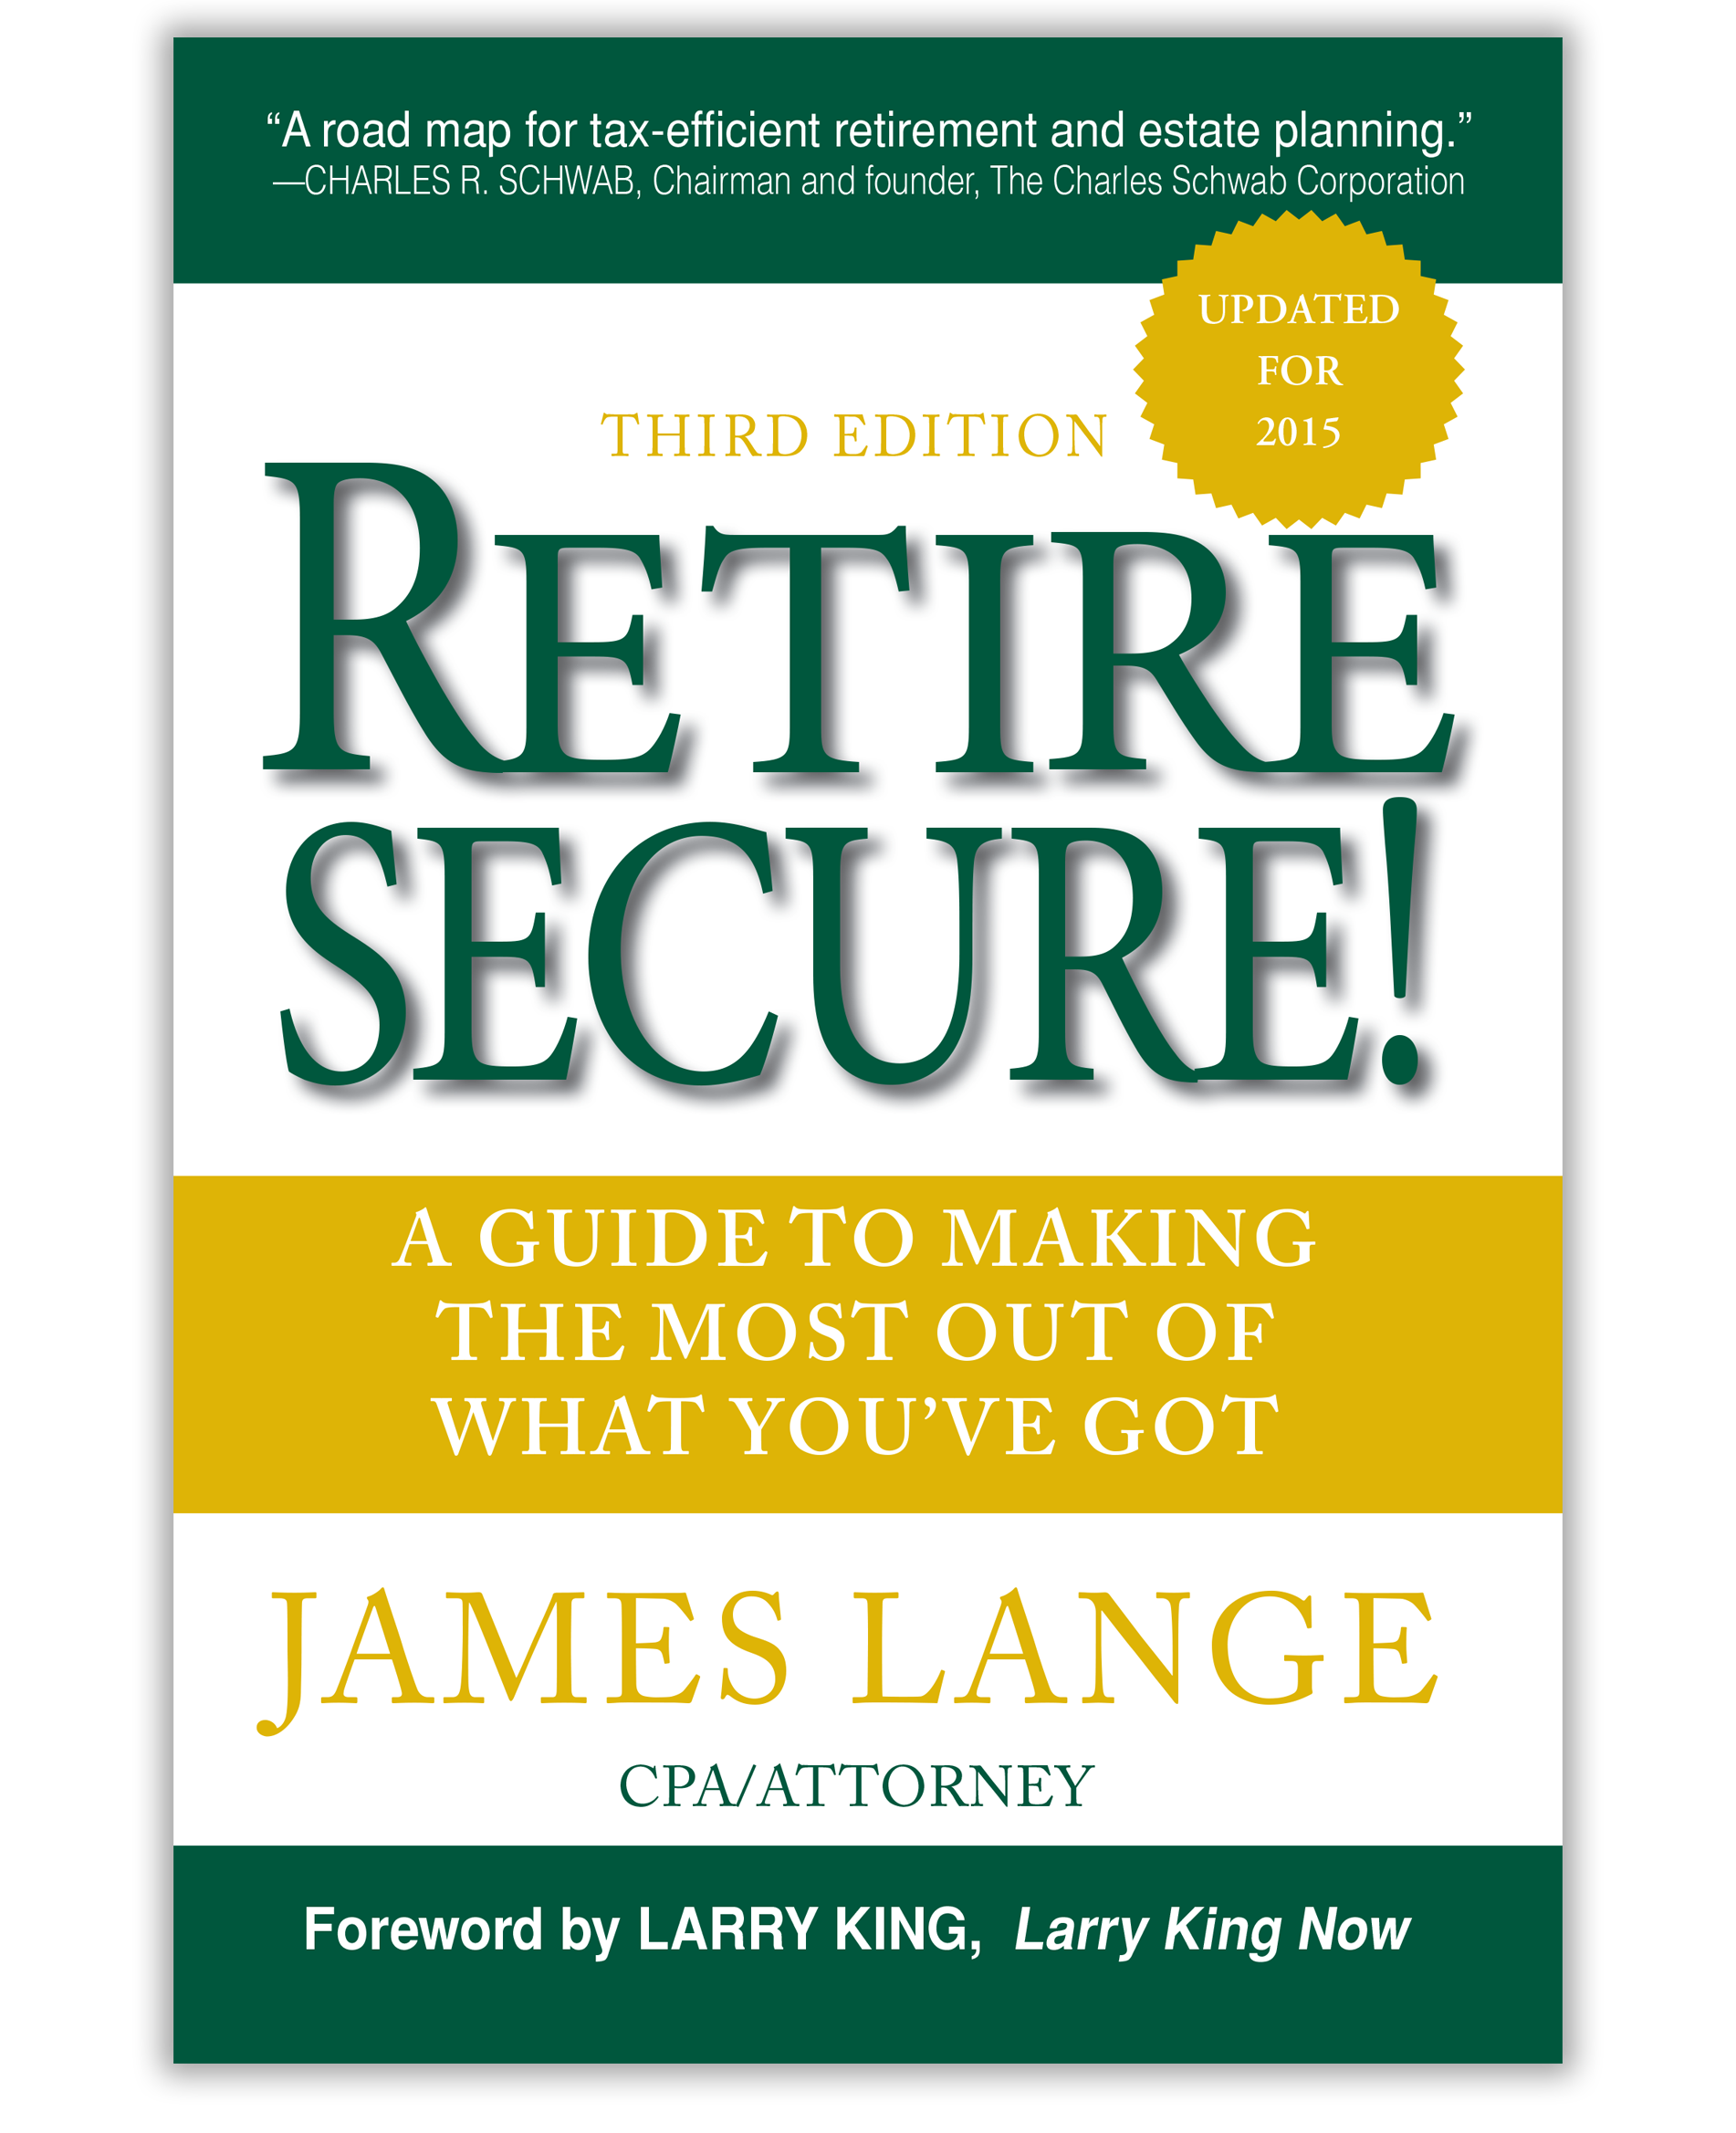 Retire Secure! Third Edition, A Guide To Making The Most Out Of What You've Got, James Lange